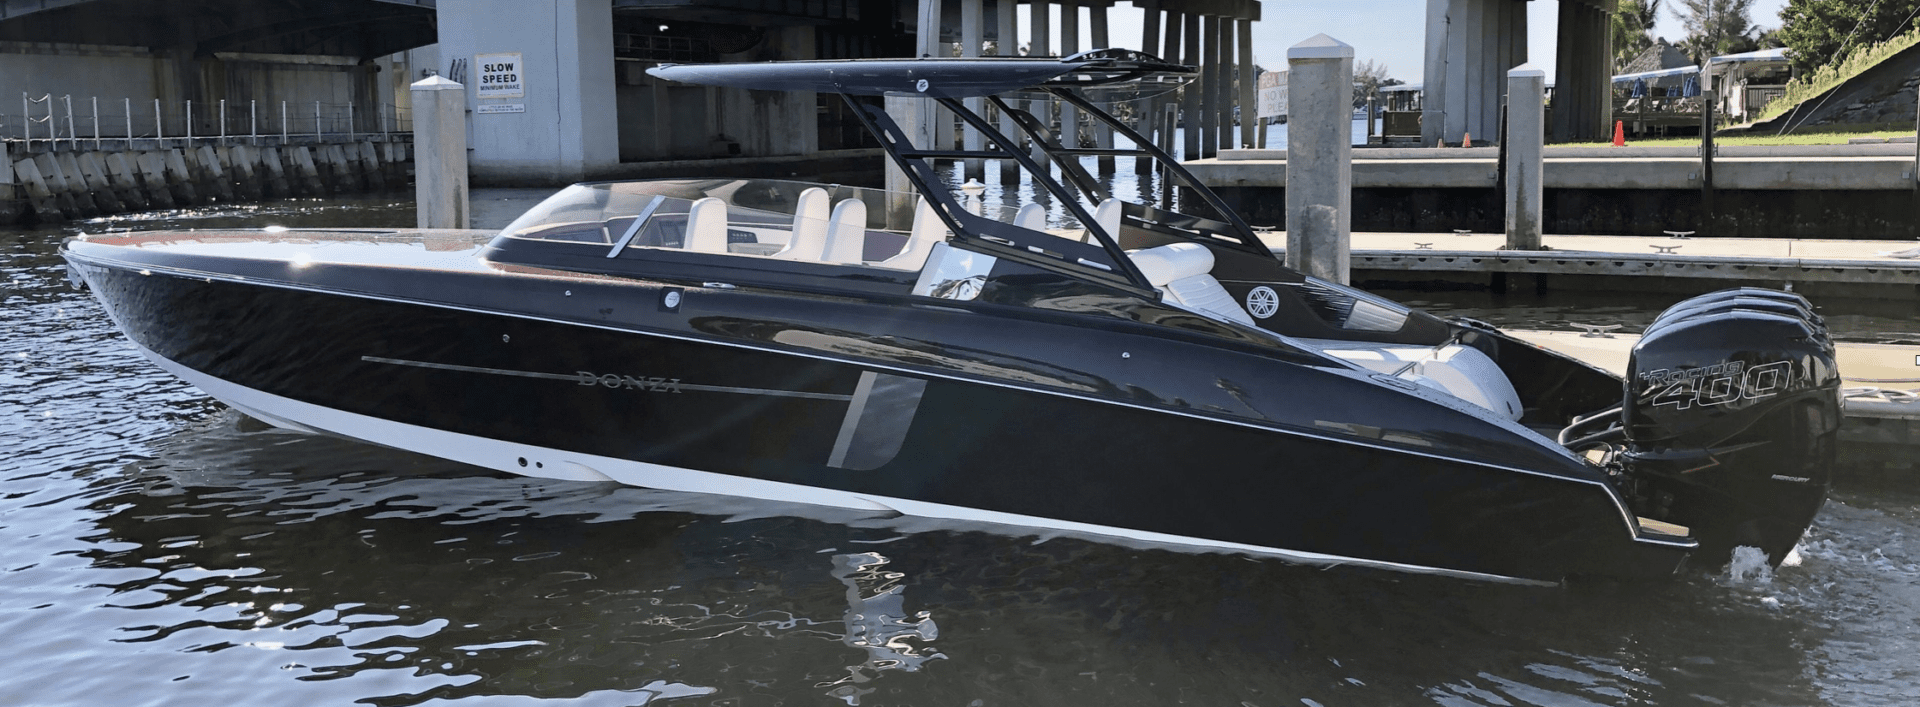 A 2020 Donzi 41 GTZ boat docked in the water.